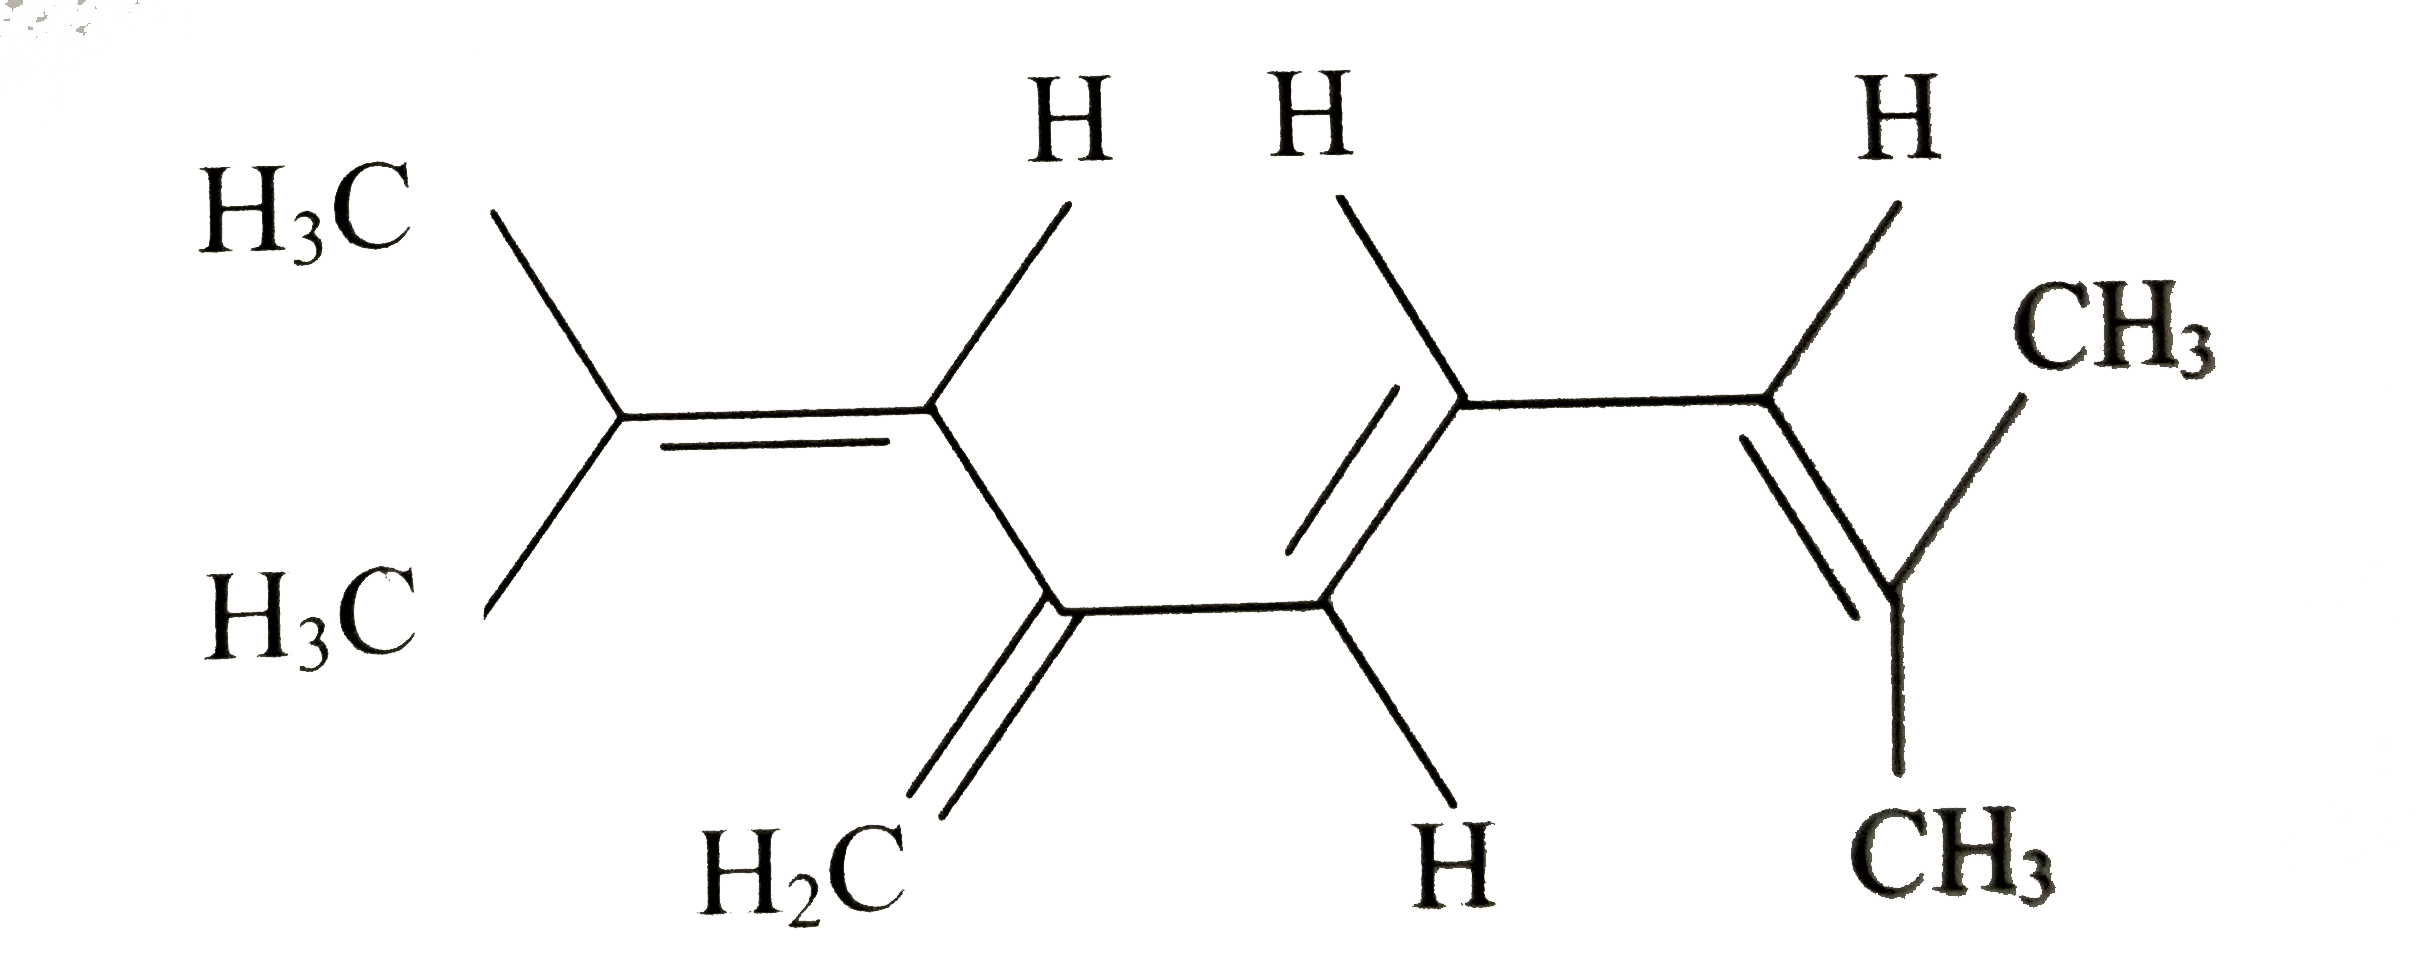 The total number of pi-bond electrons in the following structure is